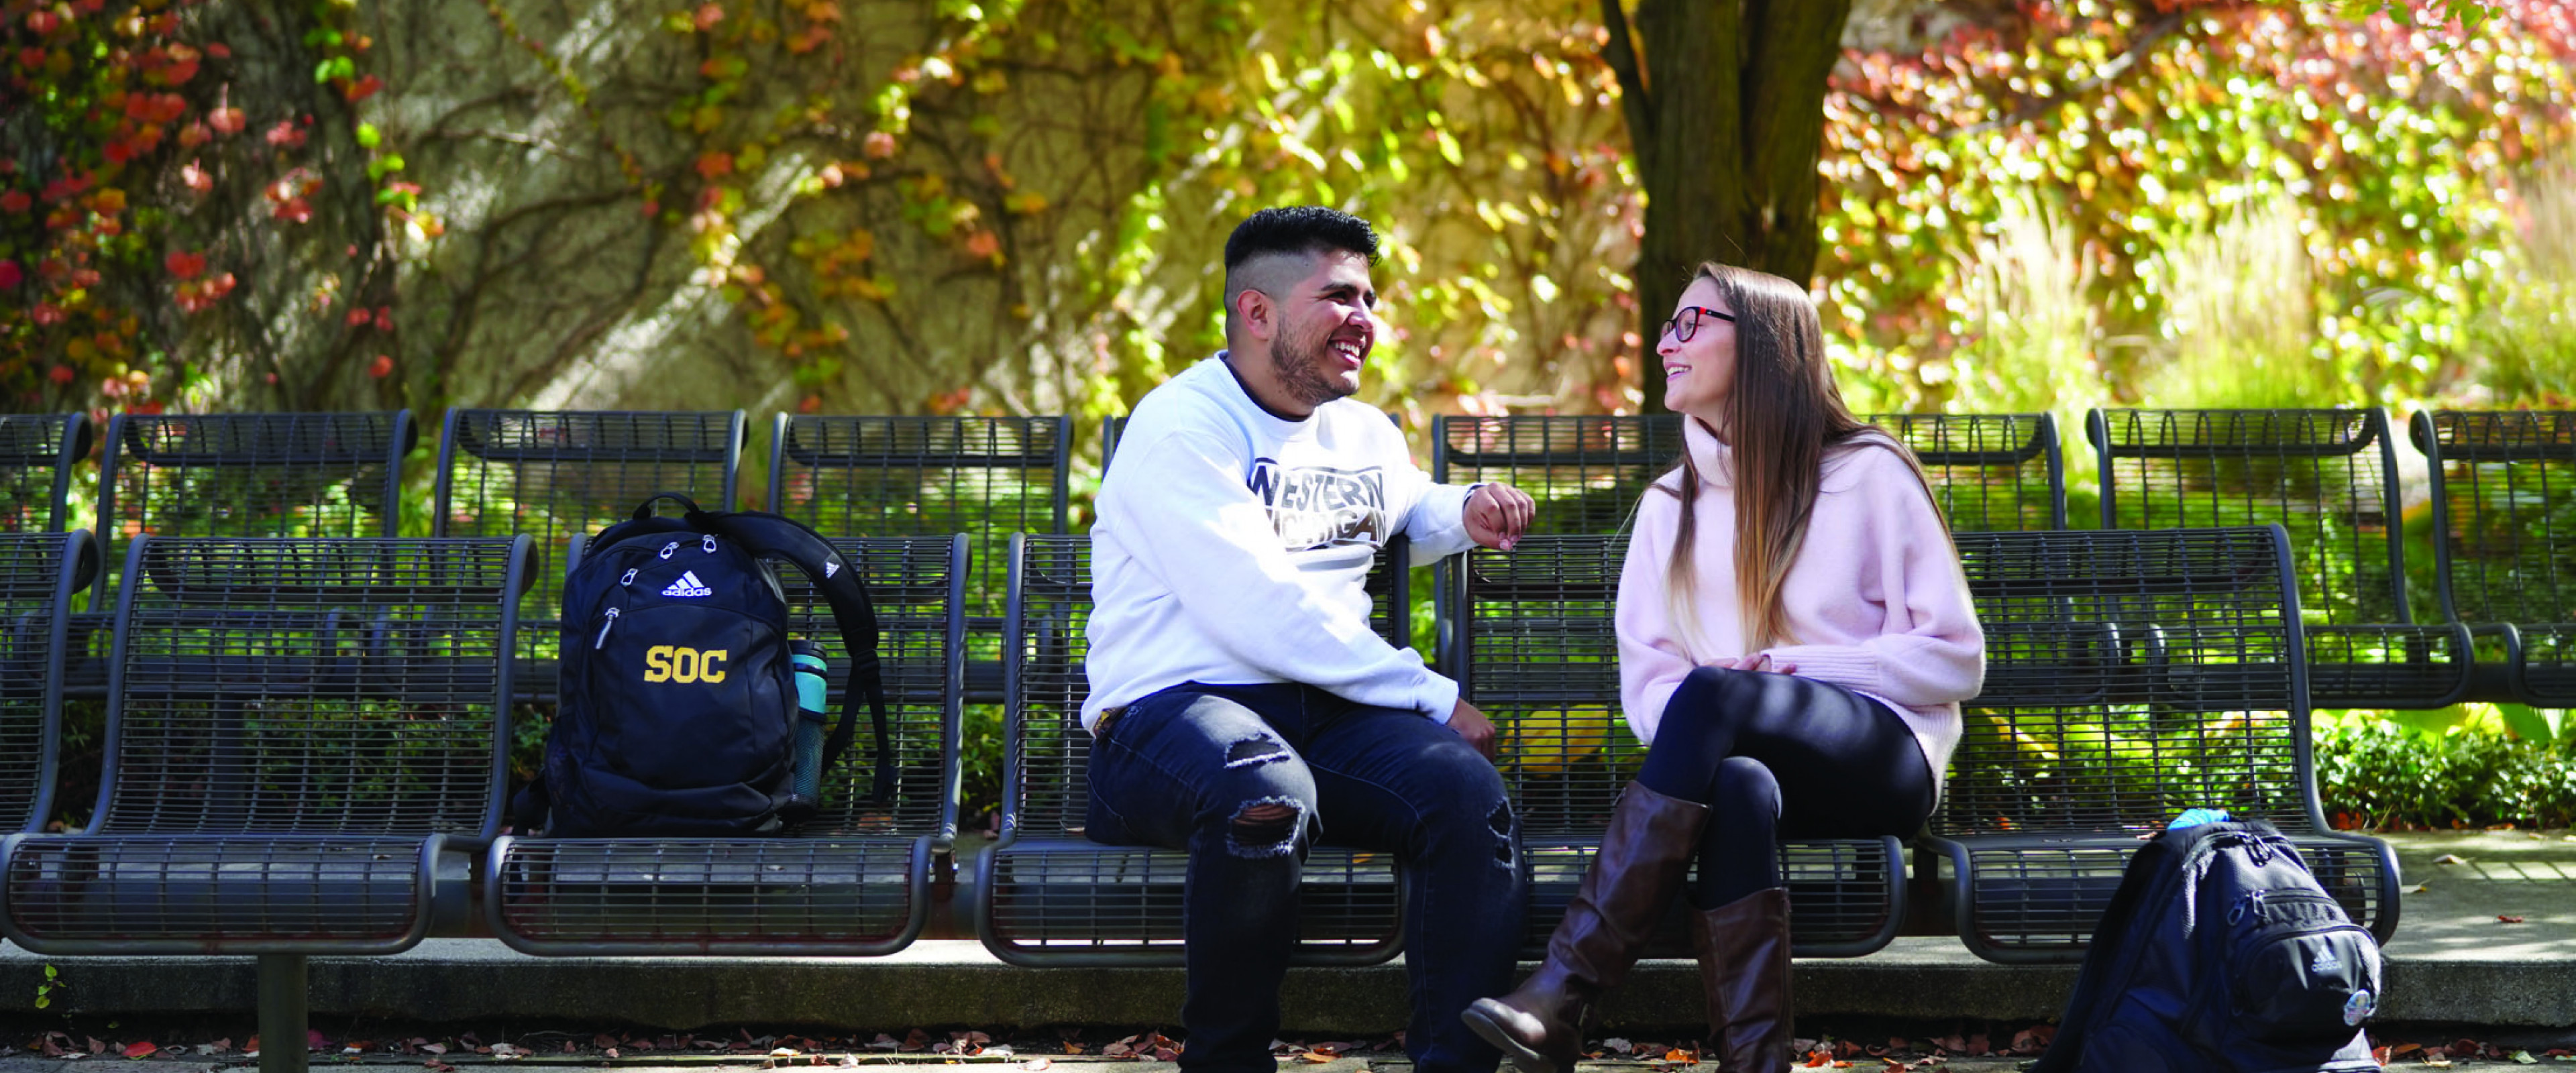 Students on campus on a bench, fall day.